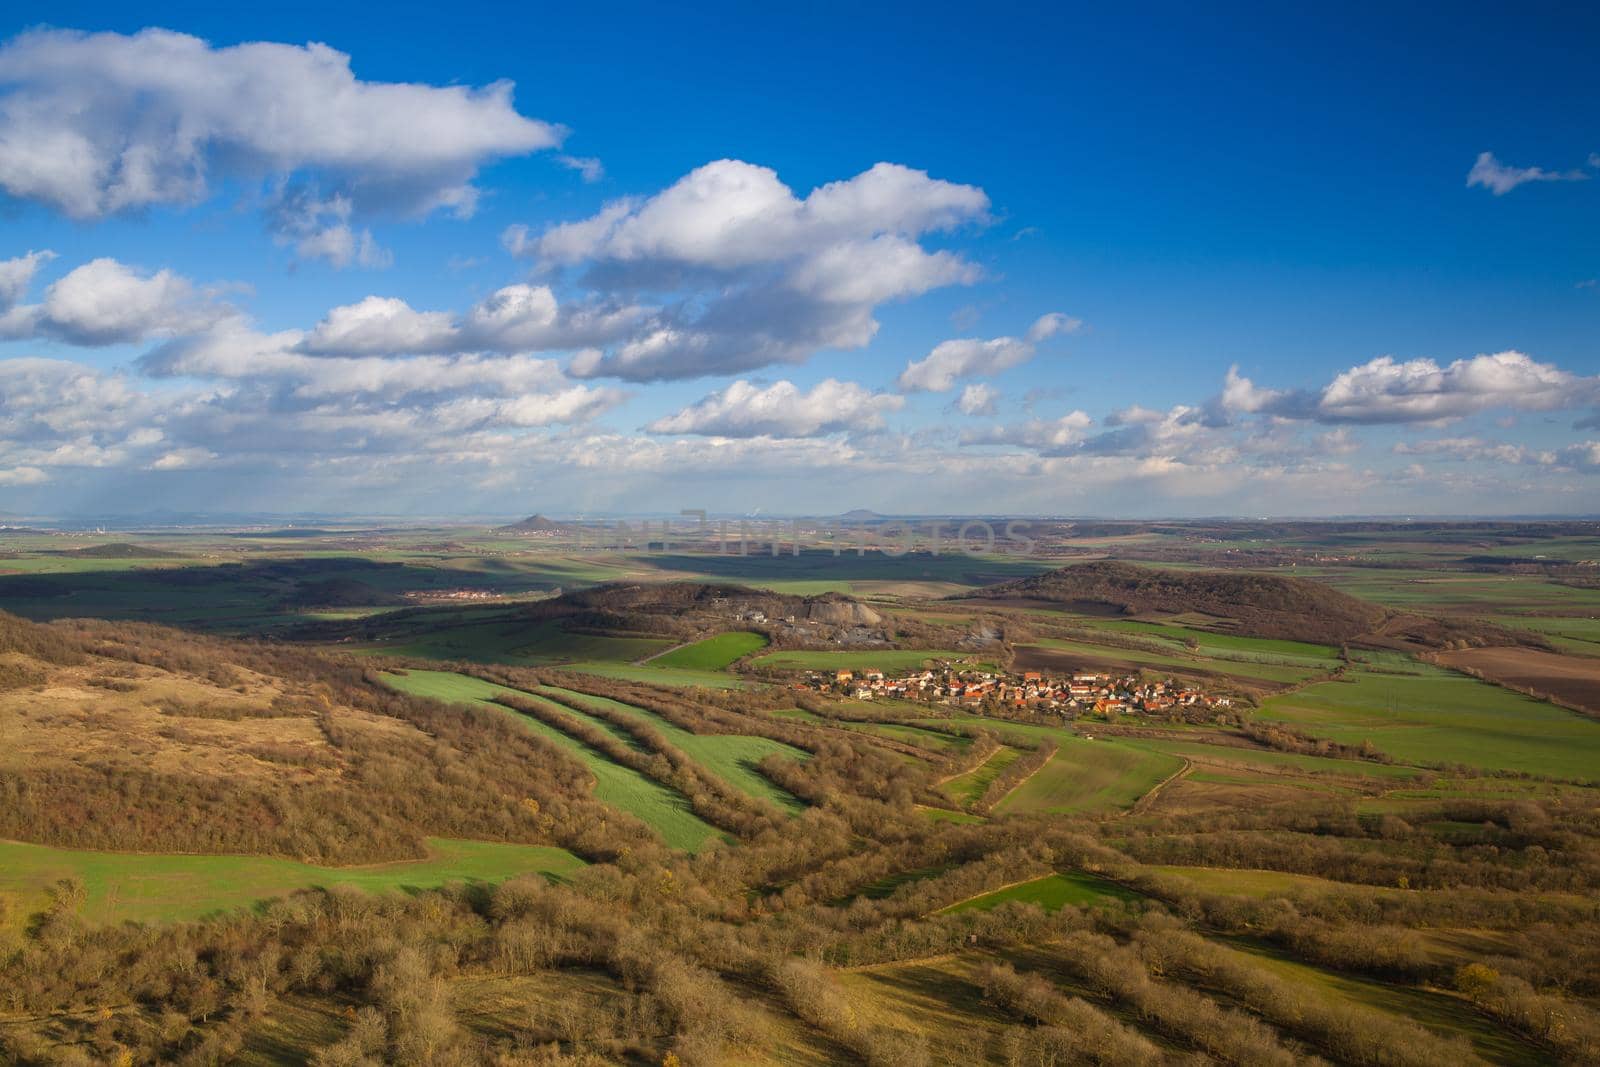 View from the top of Oblik hill. Autumn scenery in Central Bohemian Highlands, Czech Republic